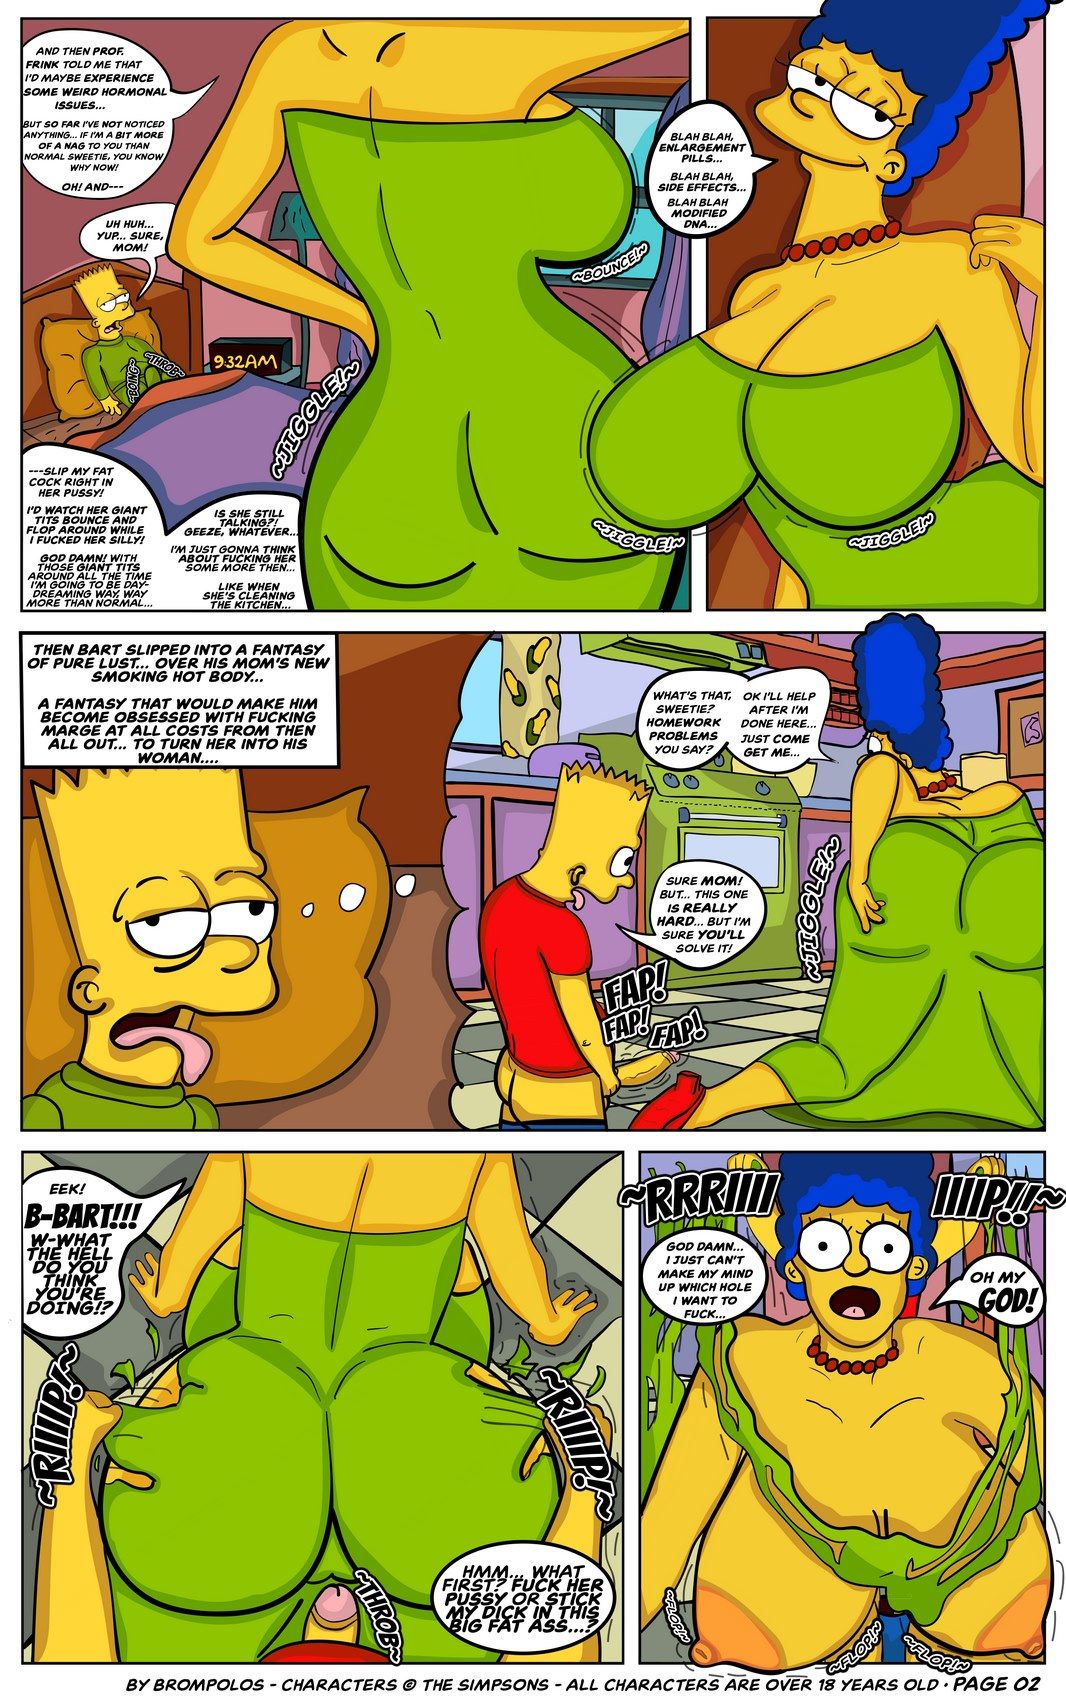 Brompolos - The Simpsons are Sexenteins page 5